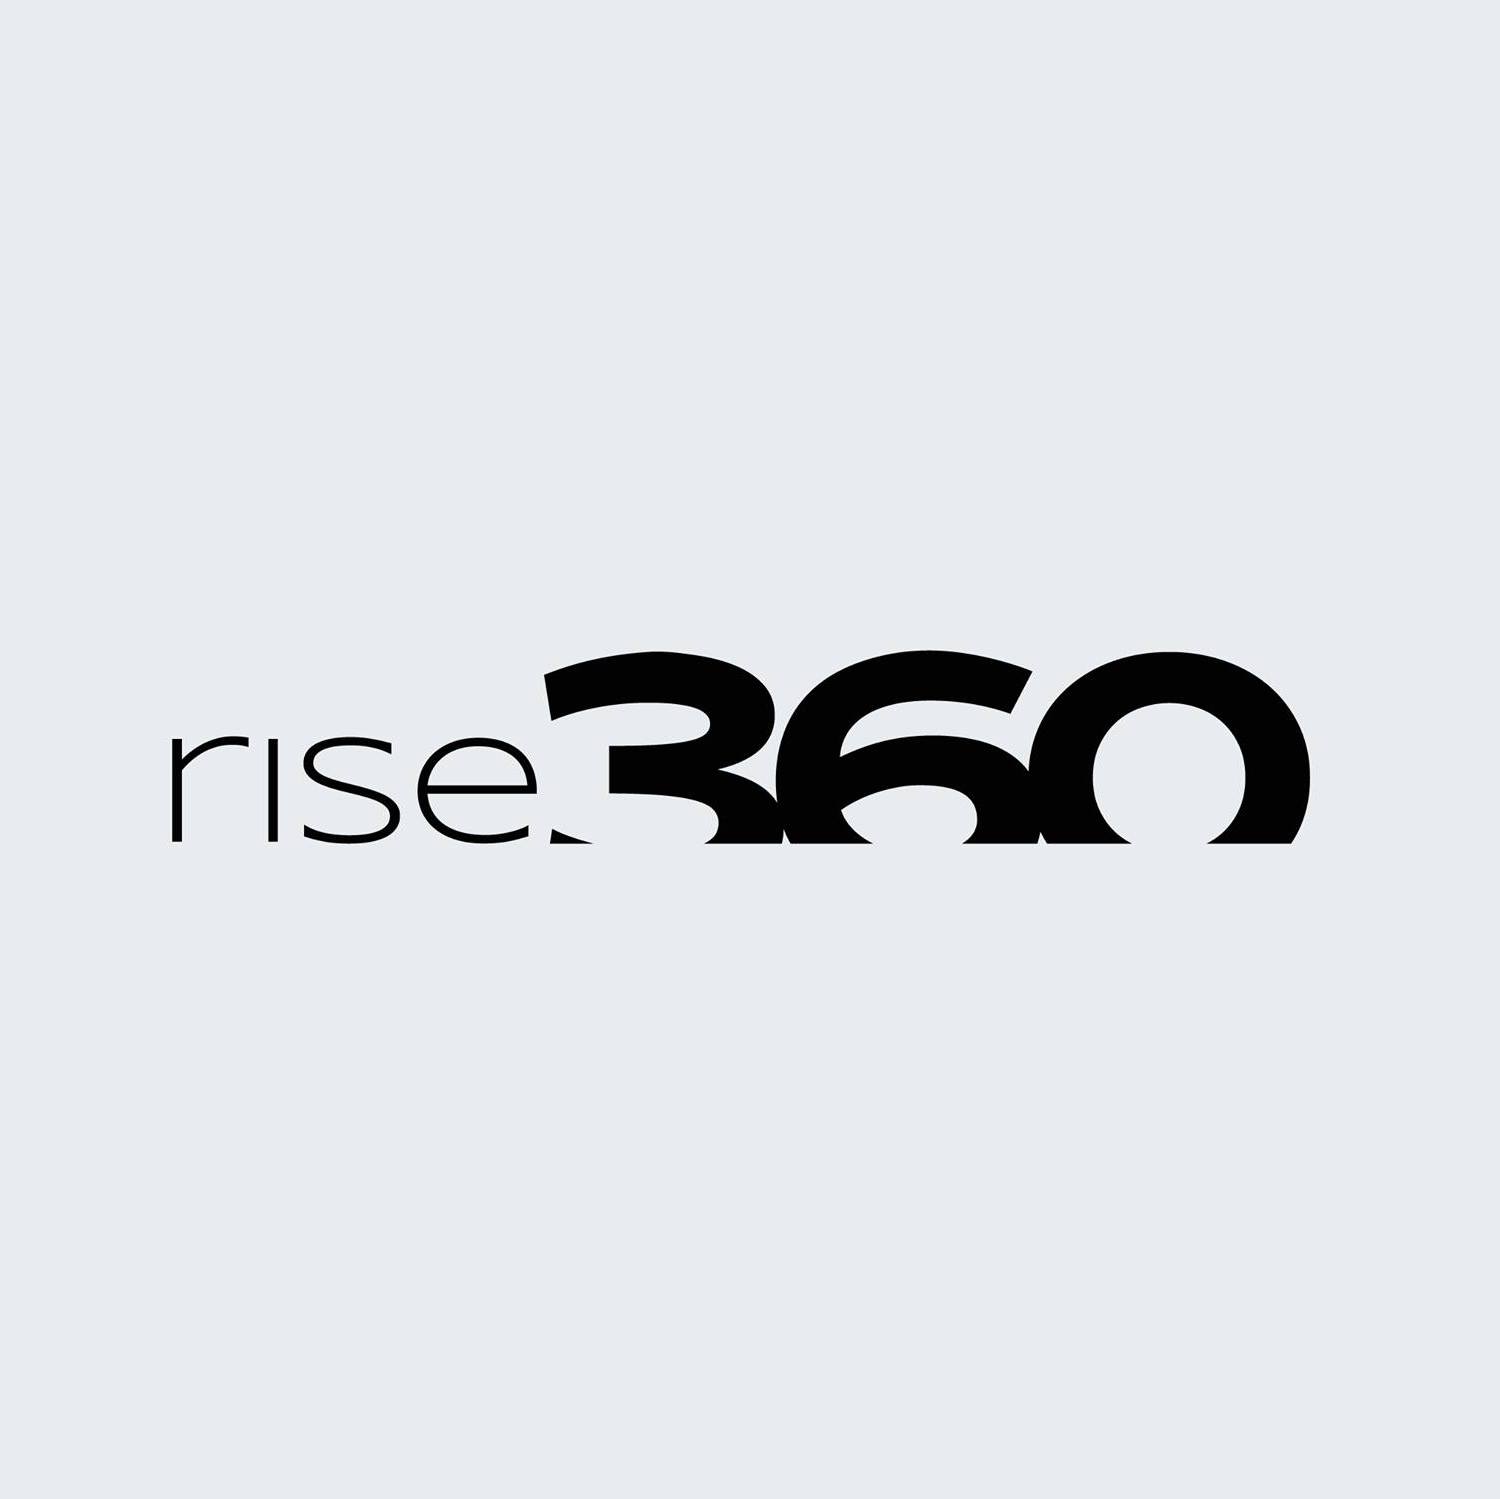 Rise360 Marketing & Business Agency